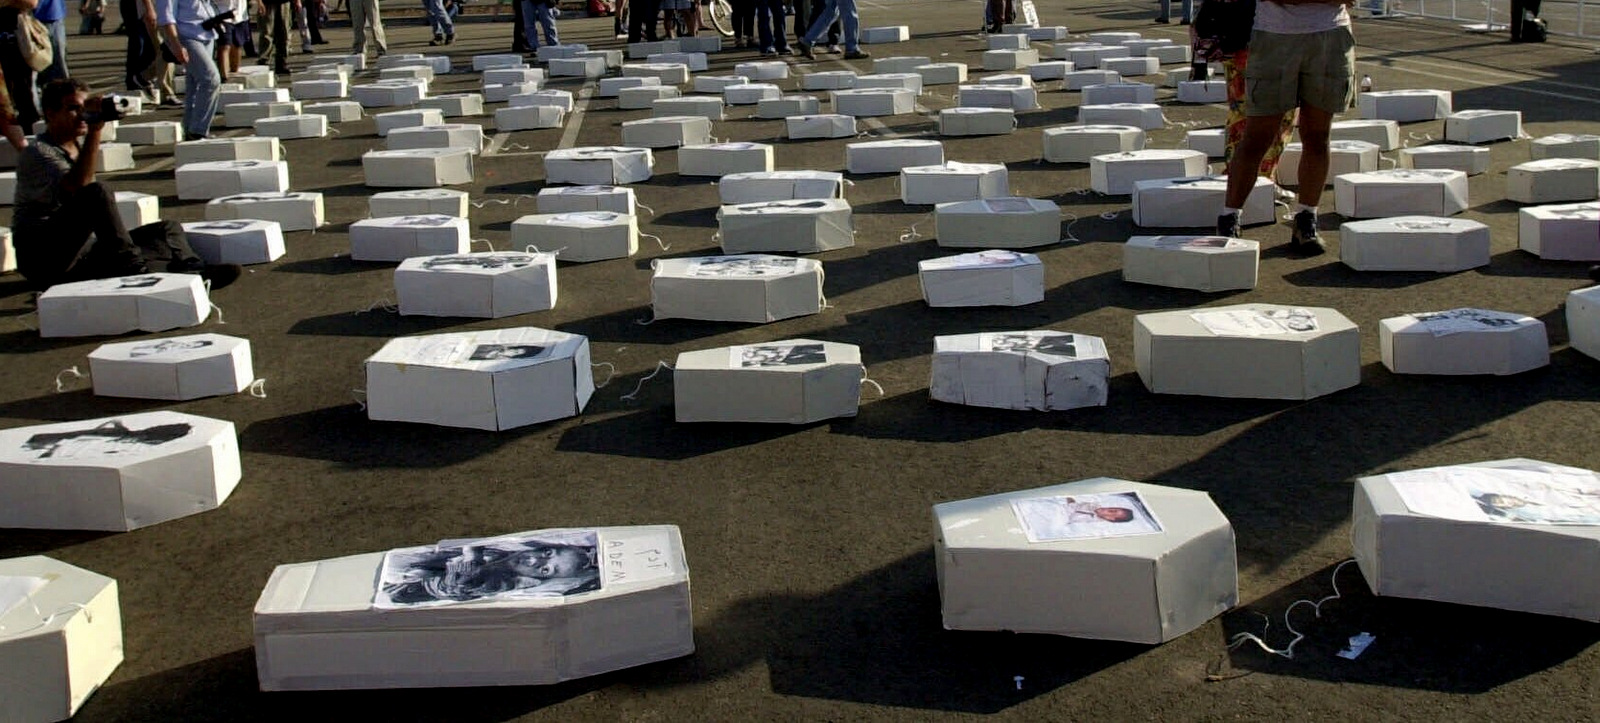 Makeshift coffins bearing the photos of Iraqi children are arranged in the designated protest area outside of the Democratic National Convention in Los Angeles, Aug. 15, 2000. U.S. sanctions killed hundreds of Iraqis each day. Nick Ut | AP